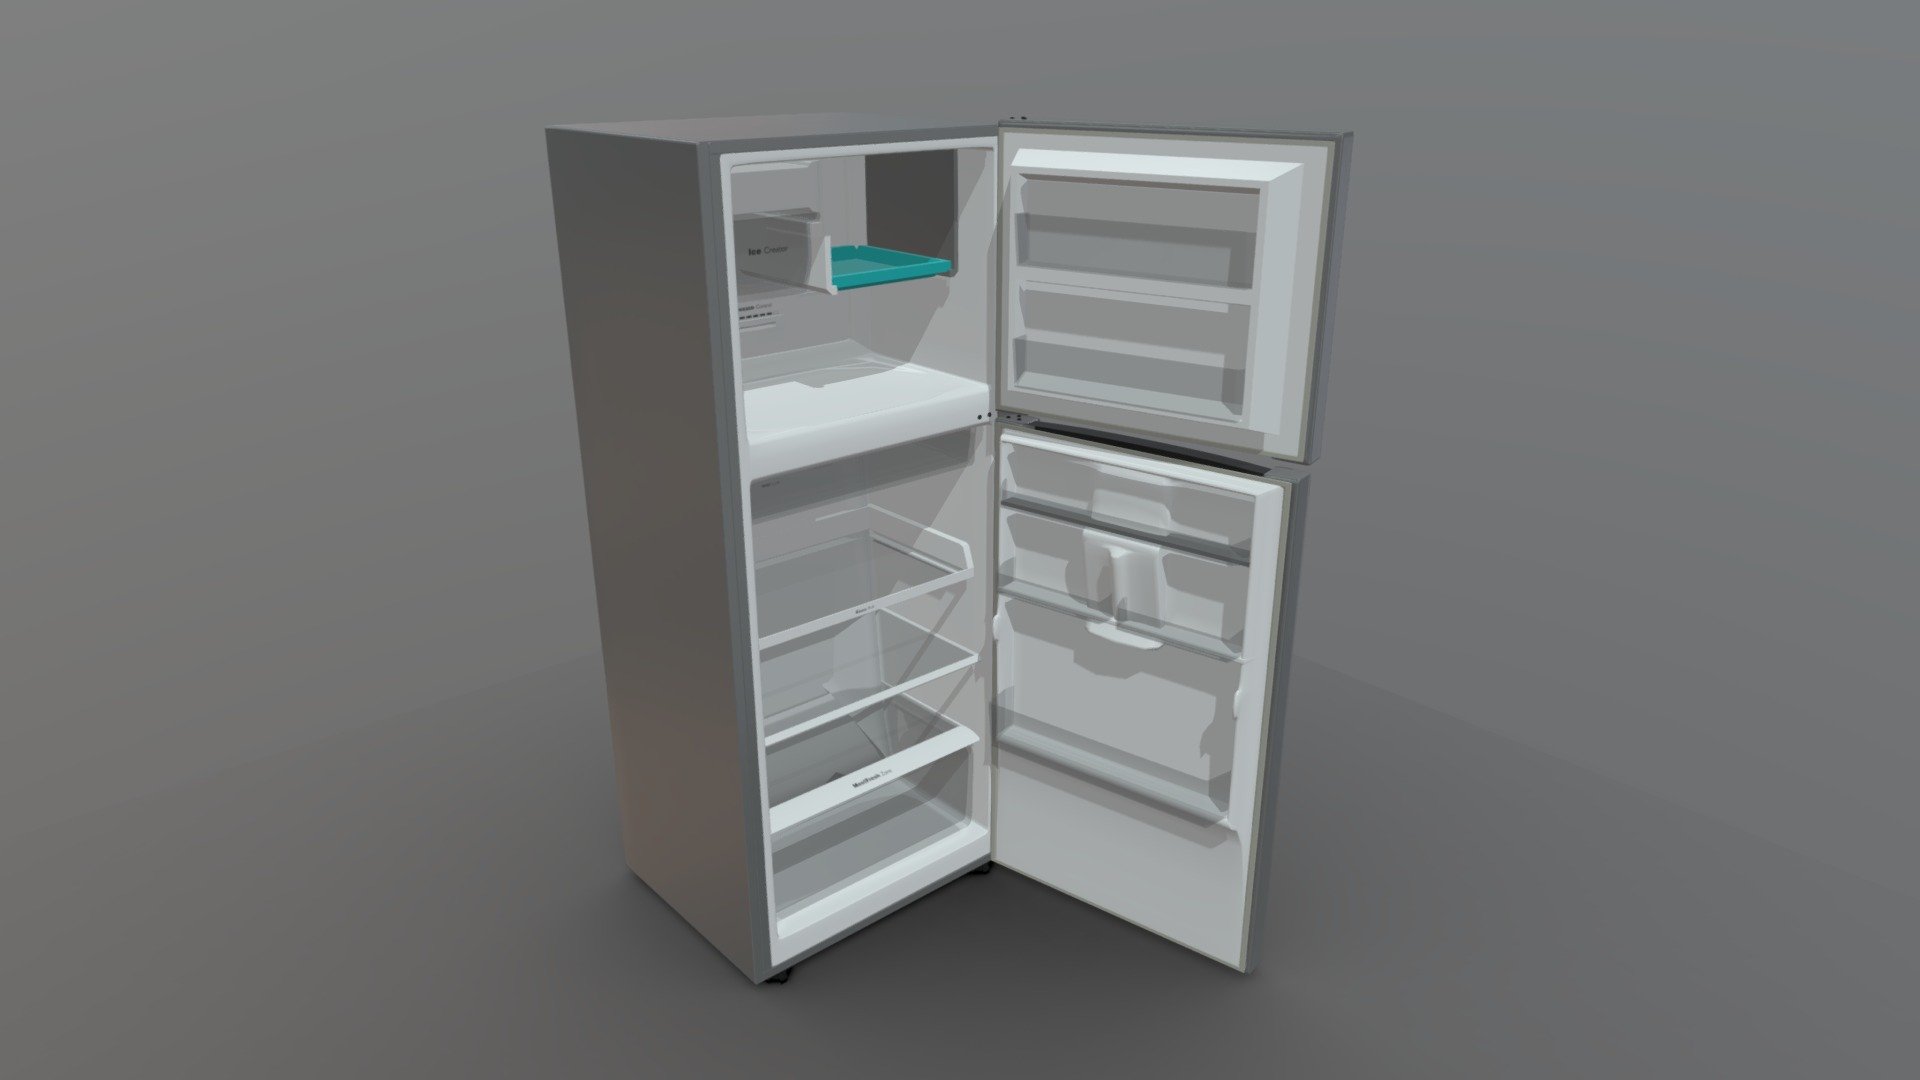 Model created based on a real refrigerator
With interior and details on back - Samsang refrigerator - 3D model by GiovanniDi-Bella 3d model